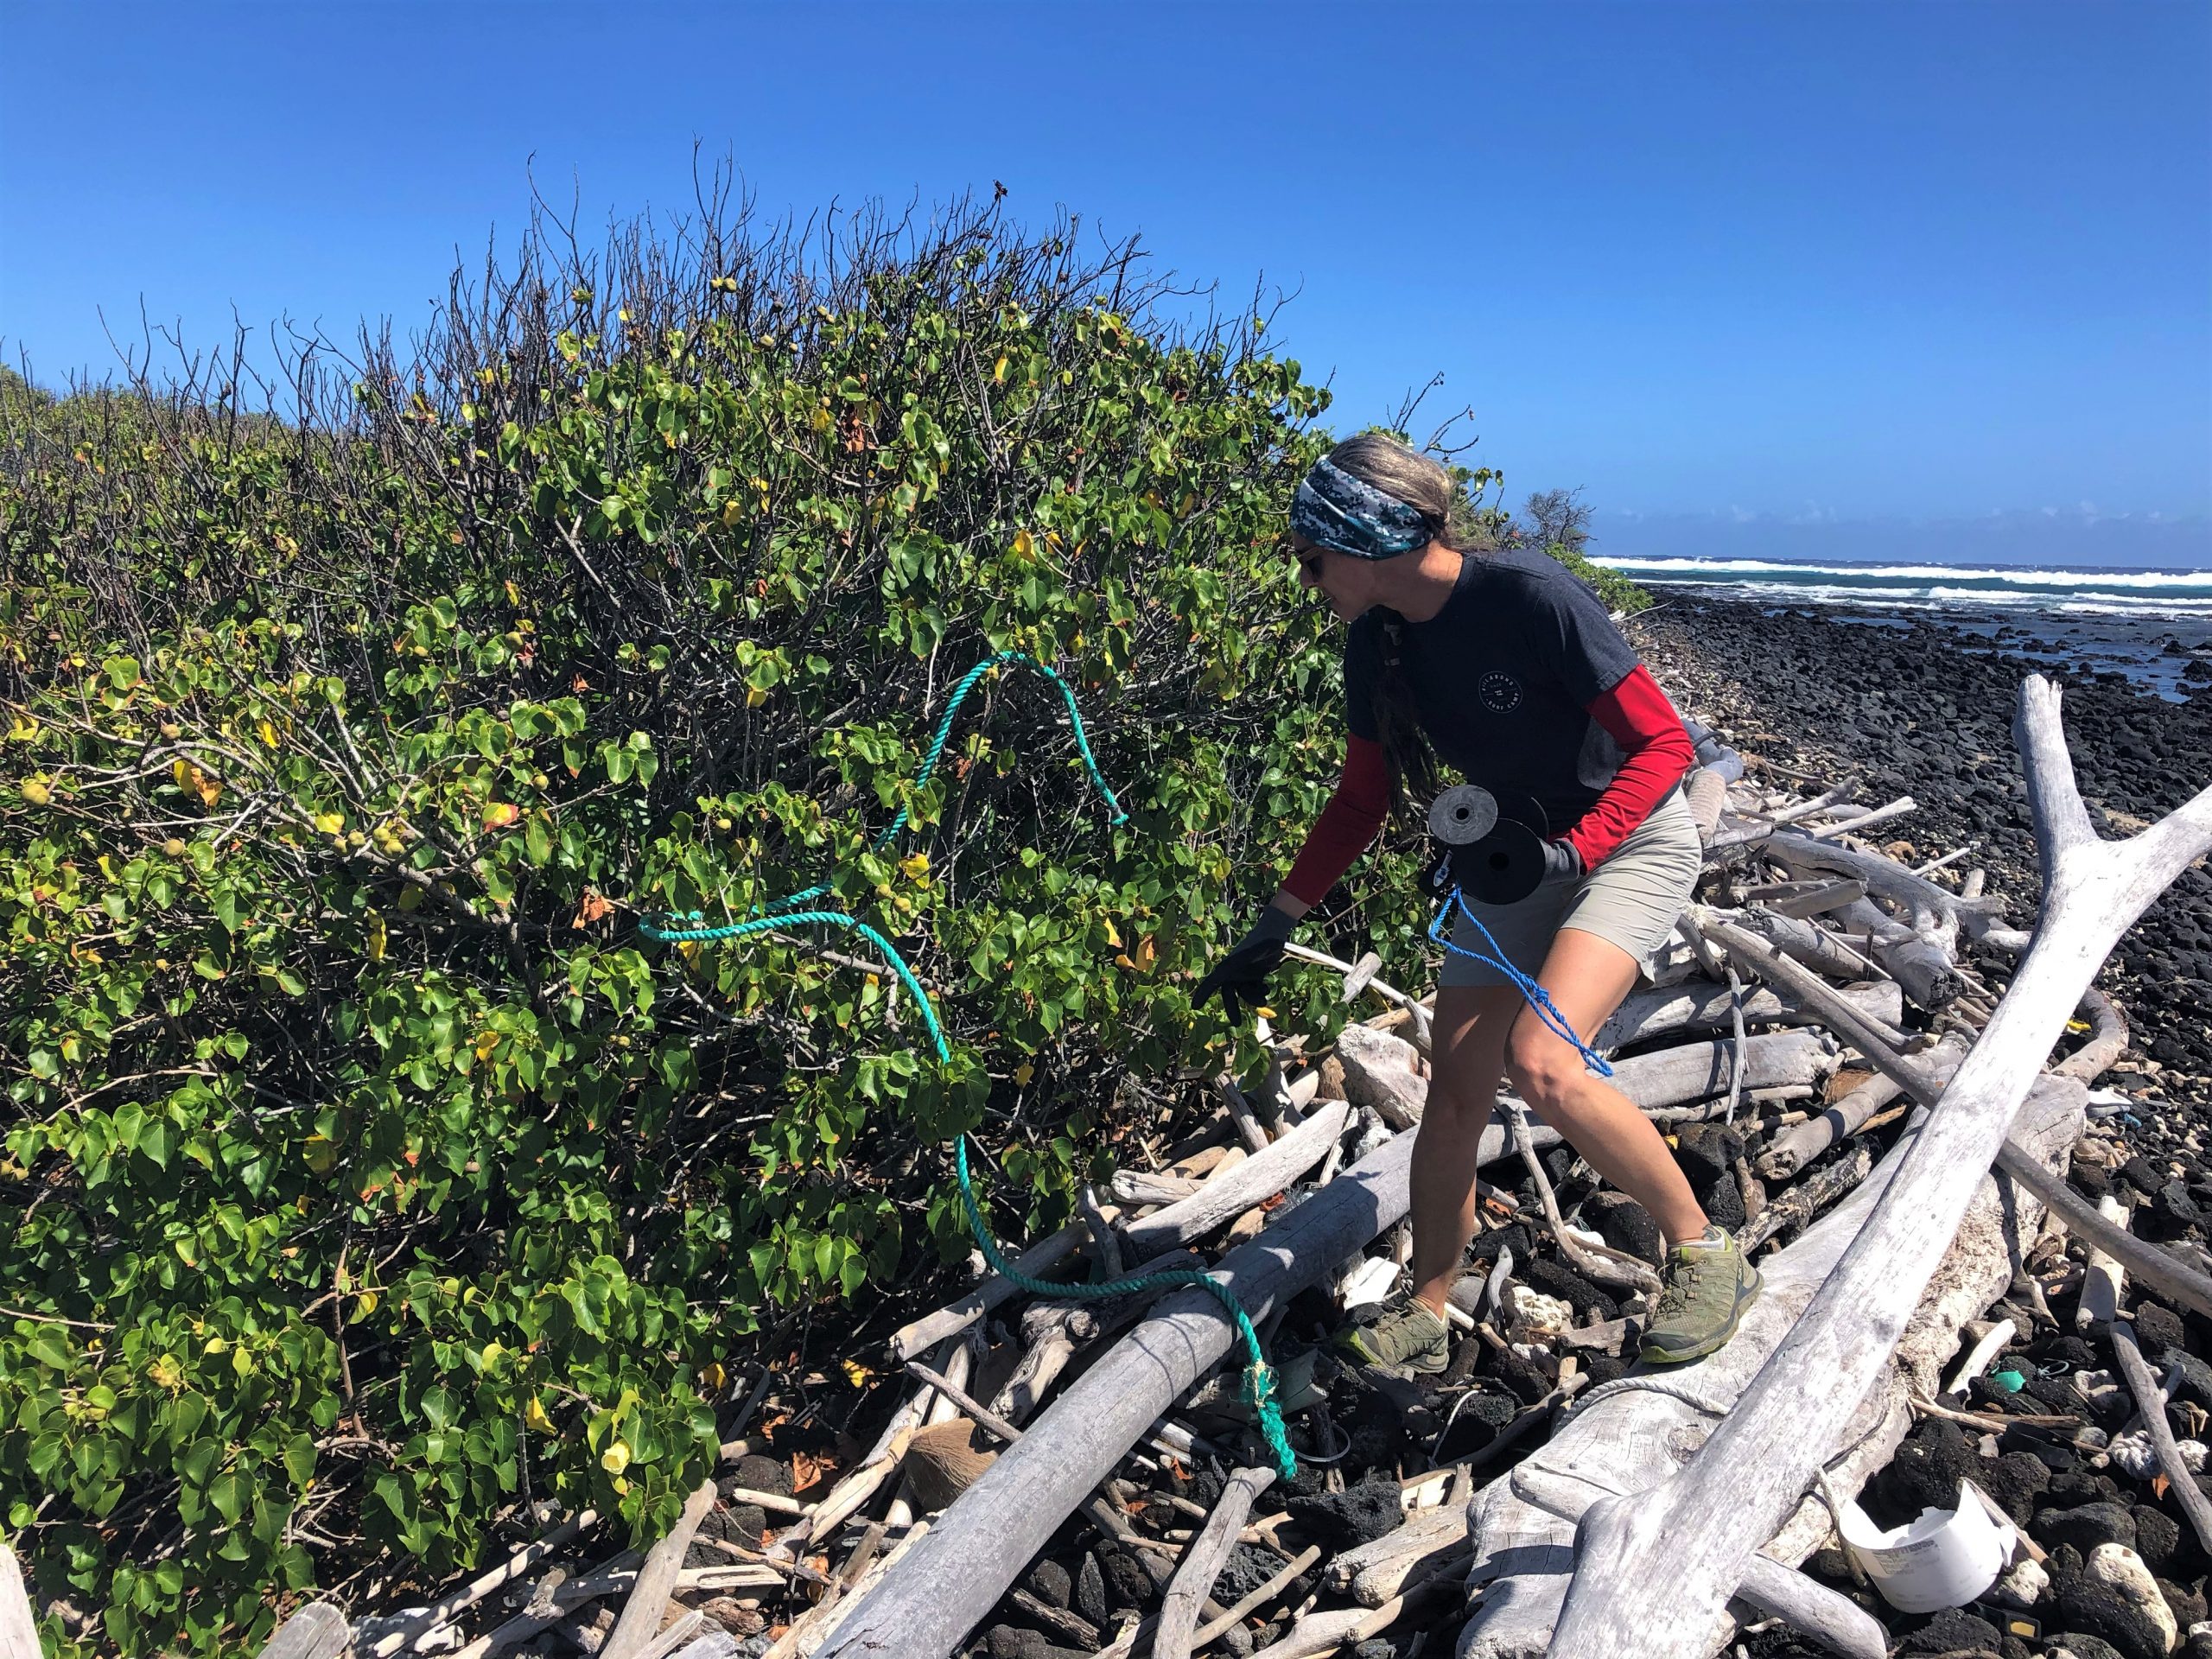 Mattie Mae pulling a rope that had washed ashore and was tangled in the plants. 